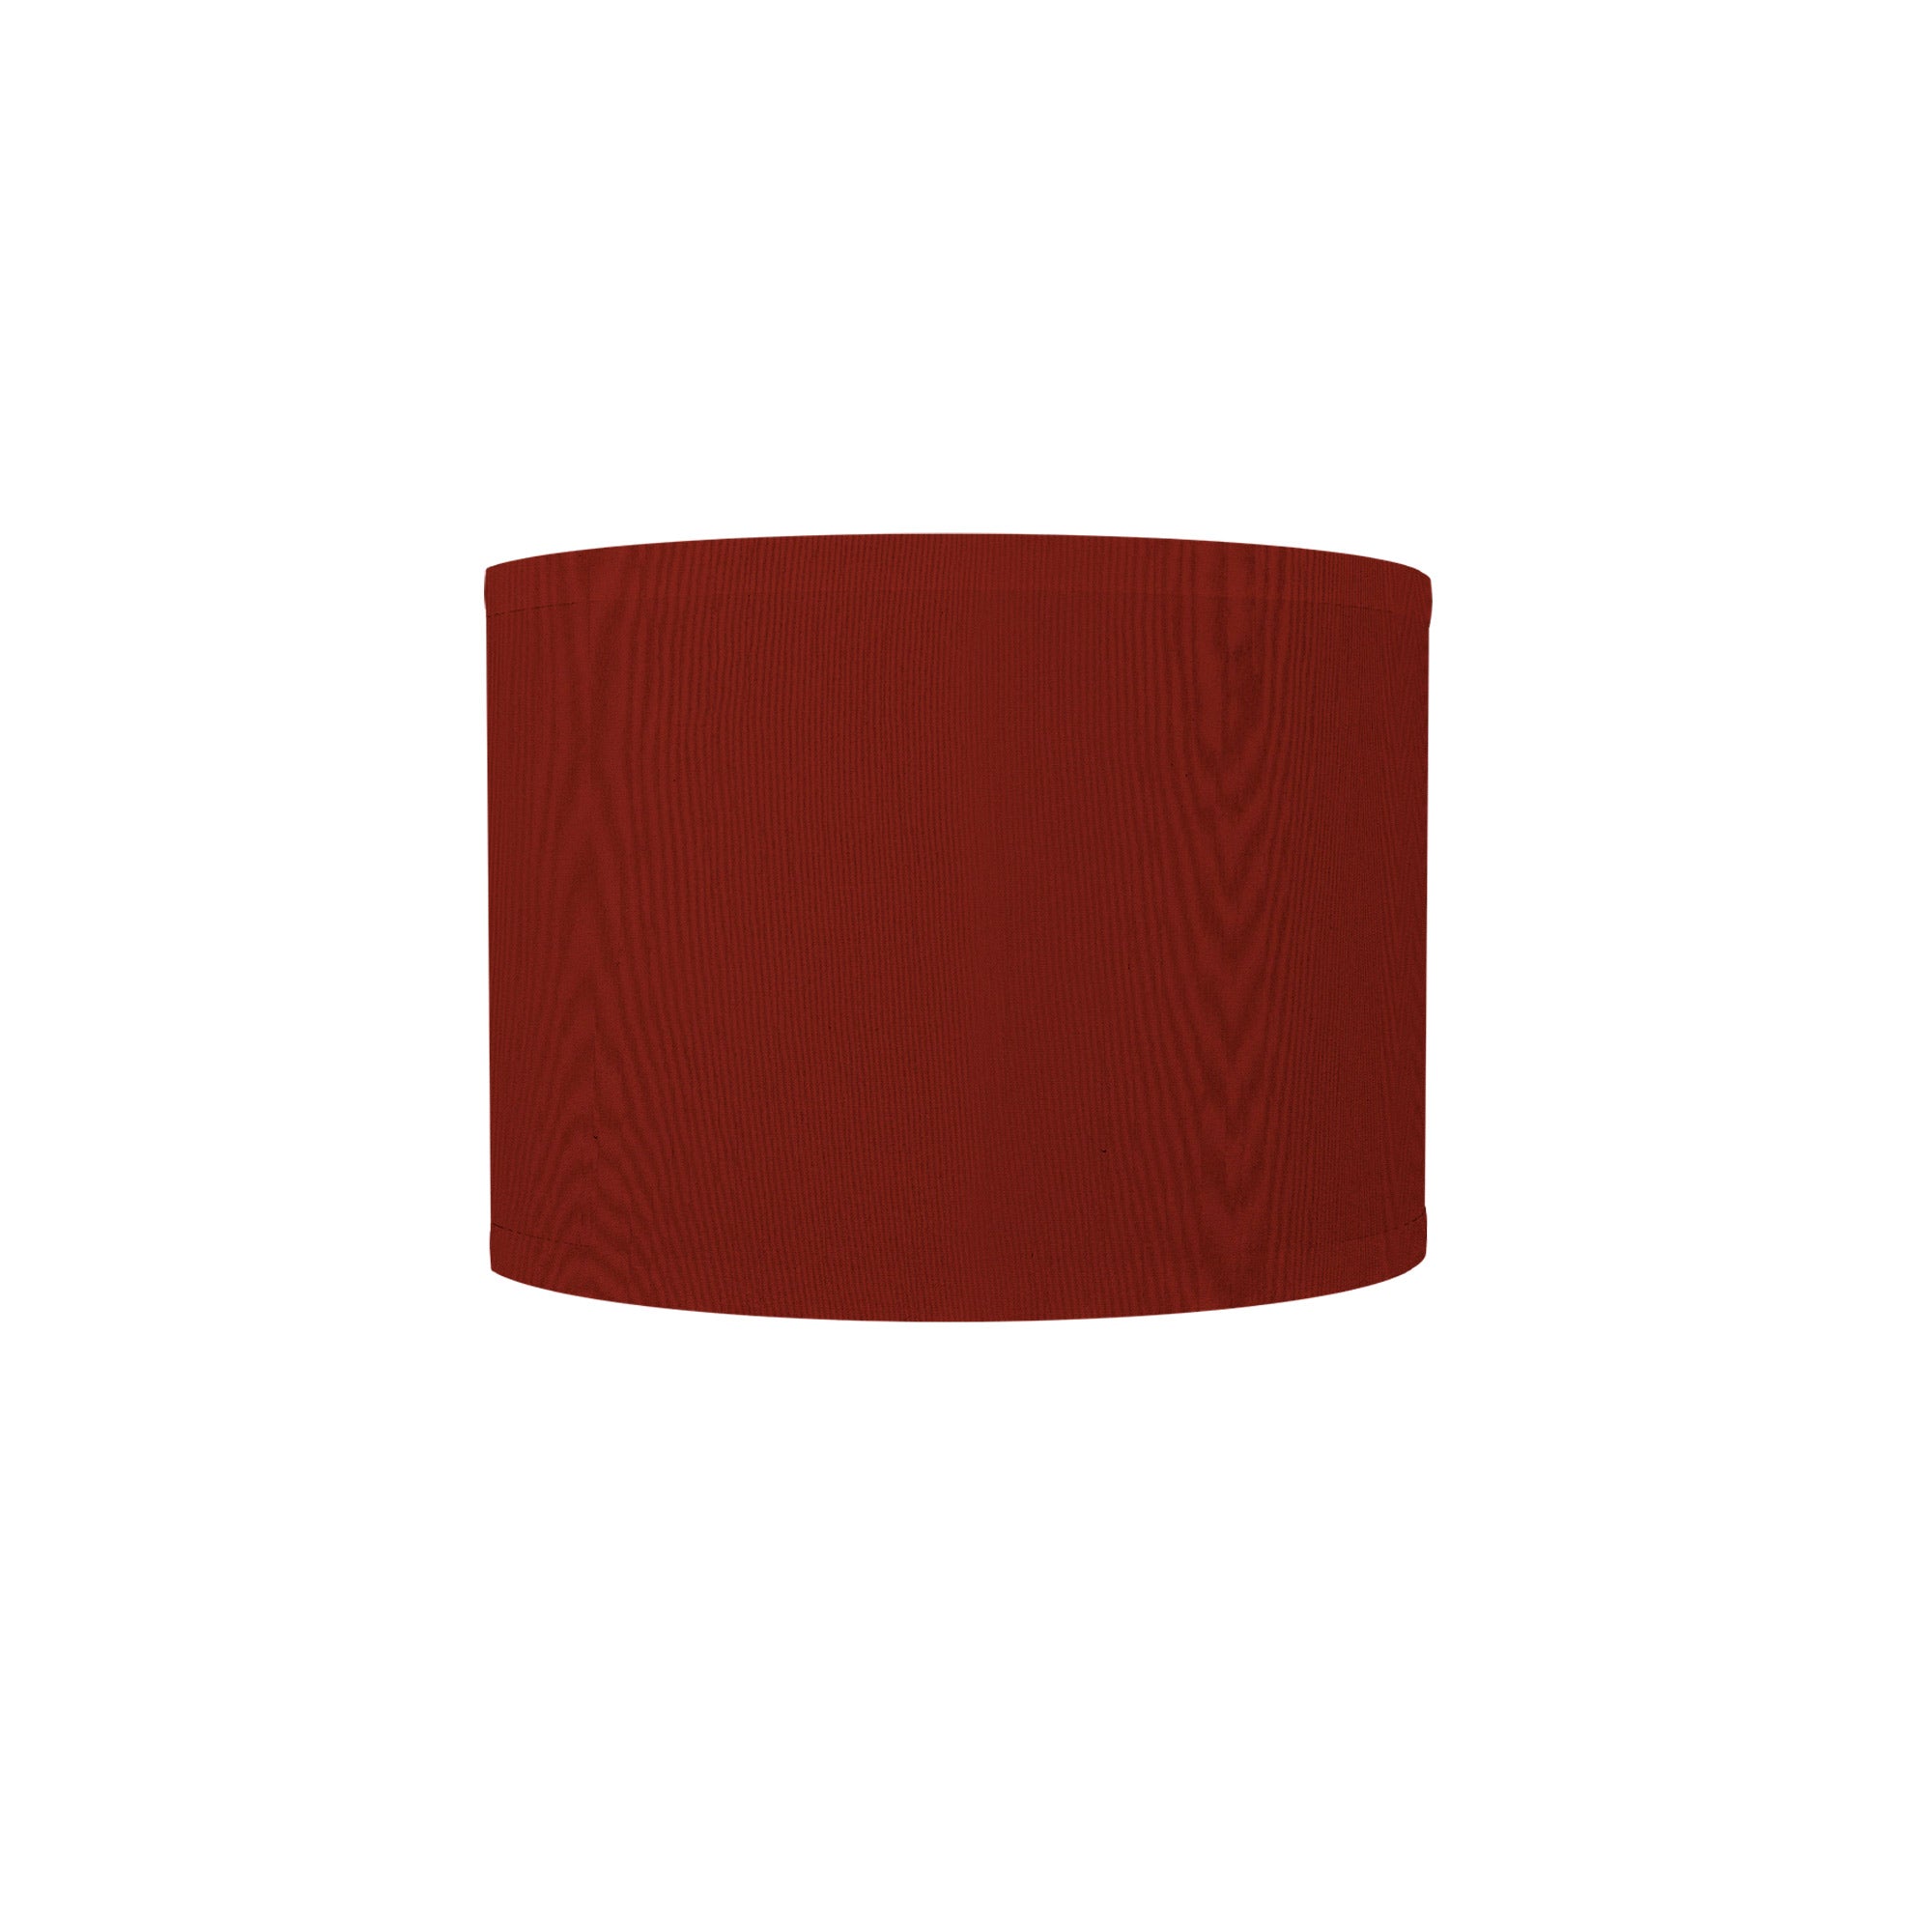 The Bryce Wall Sconce from Seascape Fixtures with a silk shade in burgundy color.